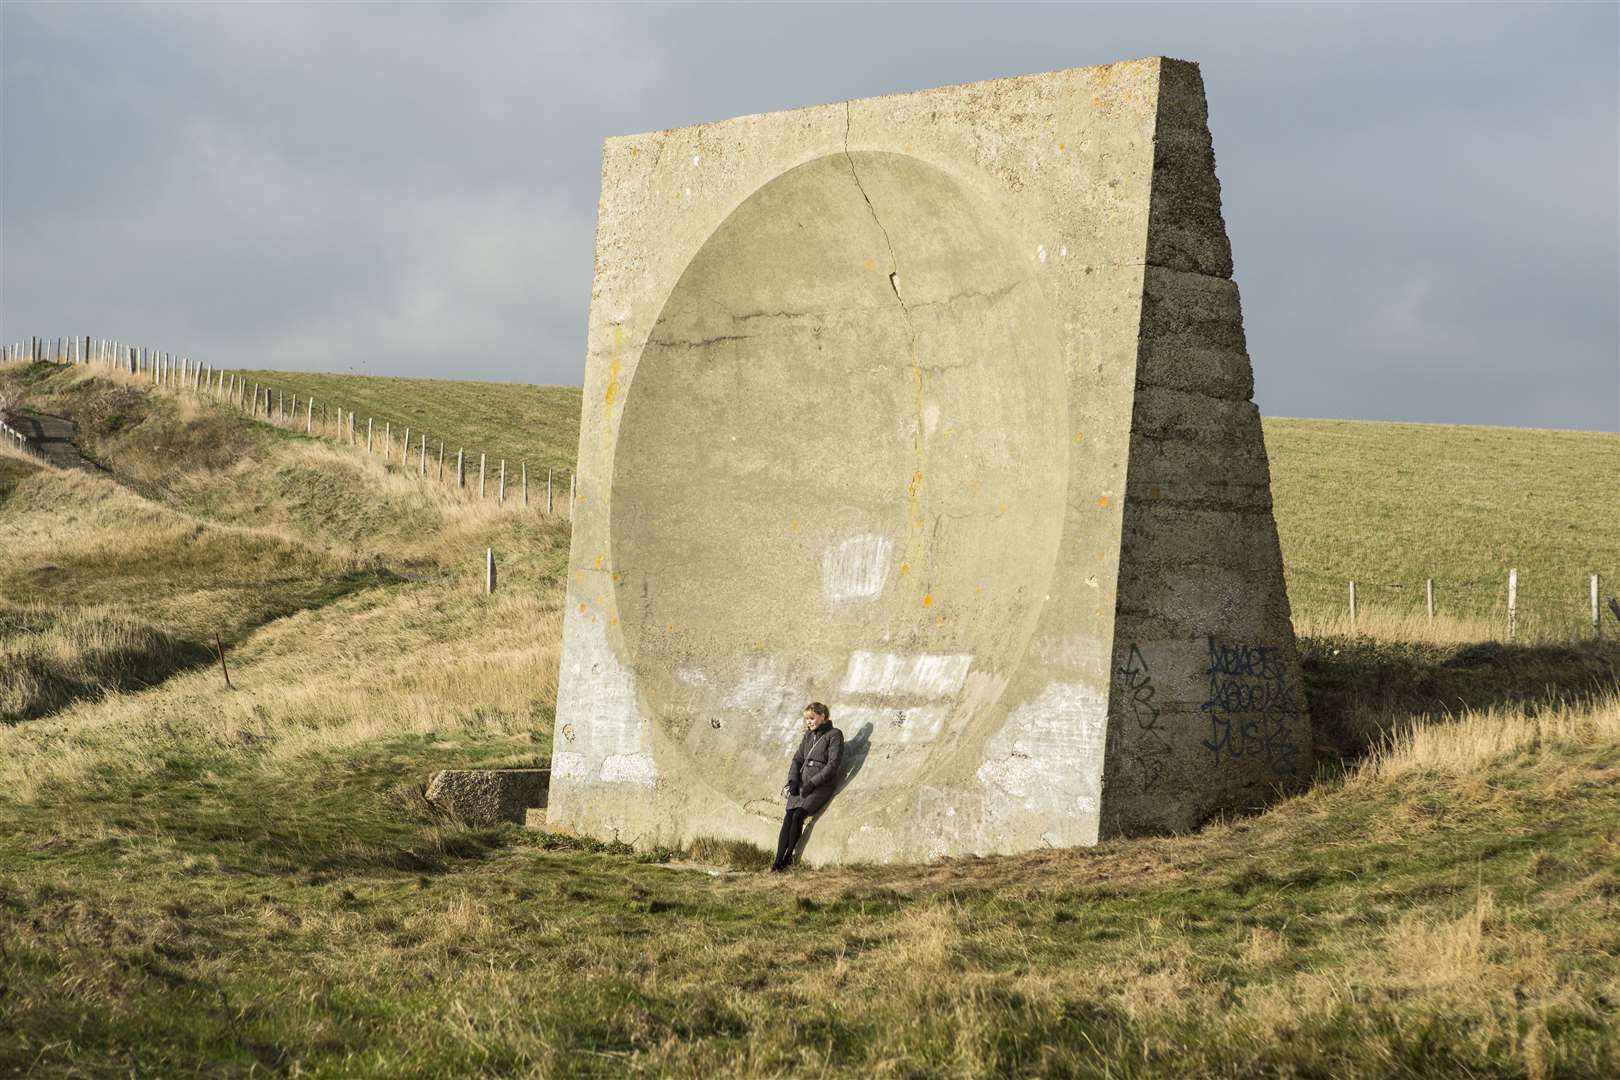 The sound mirror at Abbot's Cliff is frequently shown in the series. Creidt: BBC. Photographer: Luke Varley